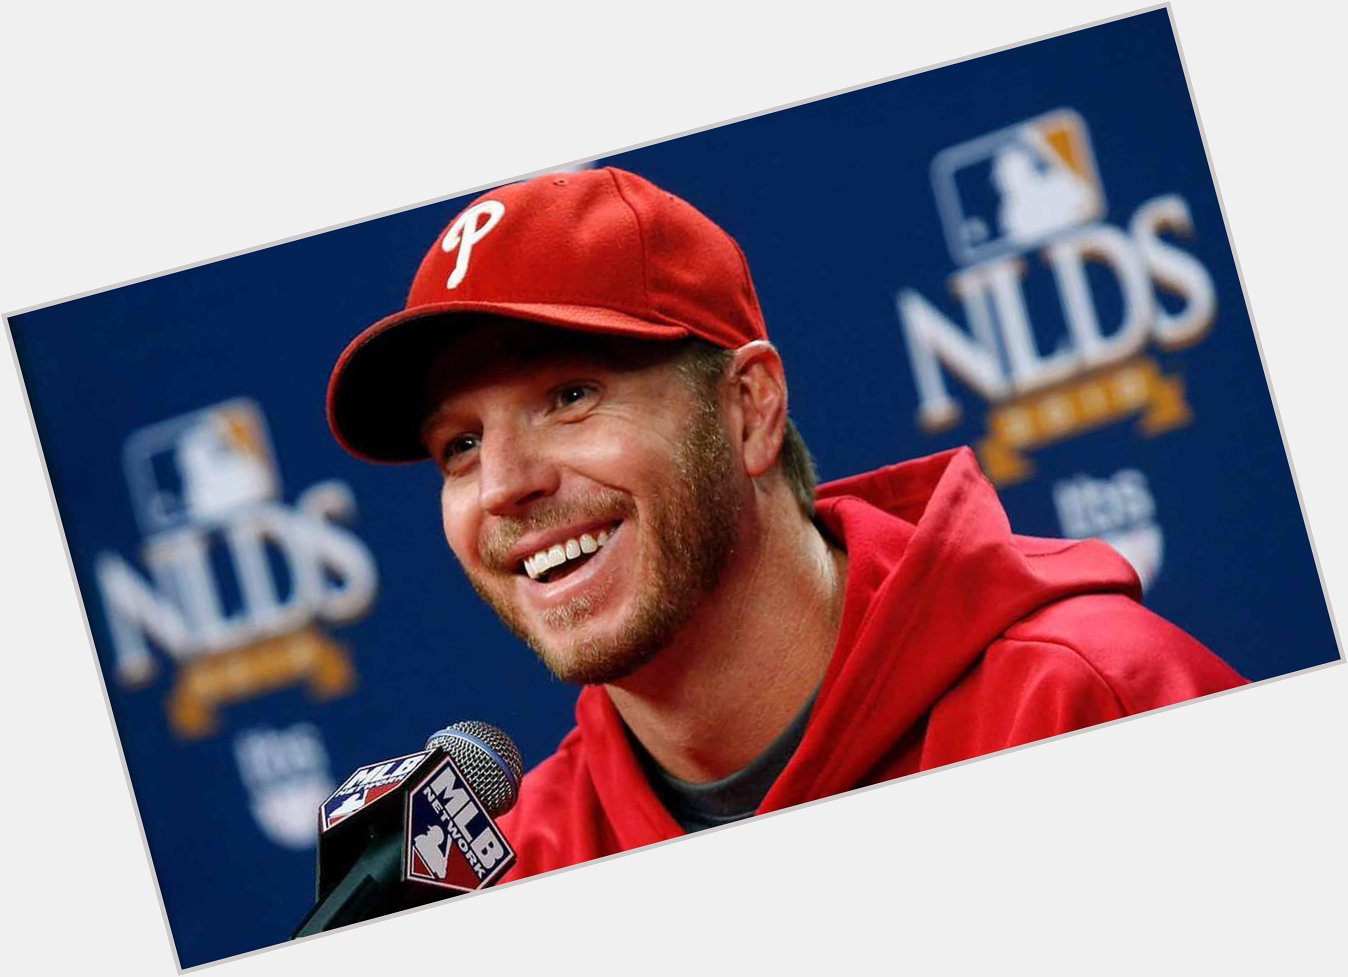 Happy birthday to the late great Roy Halladay 